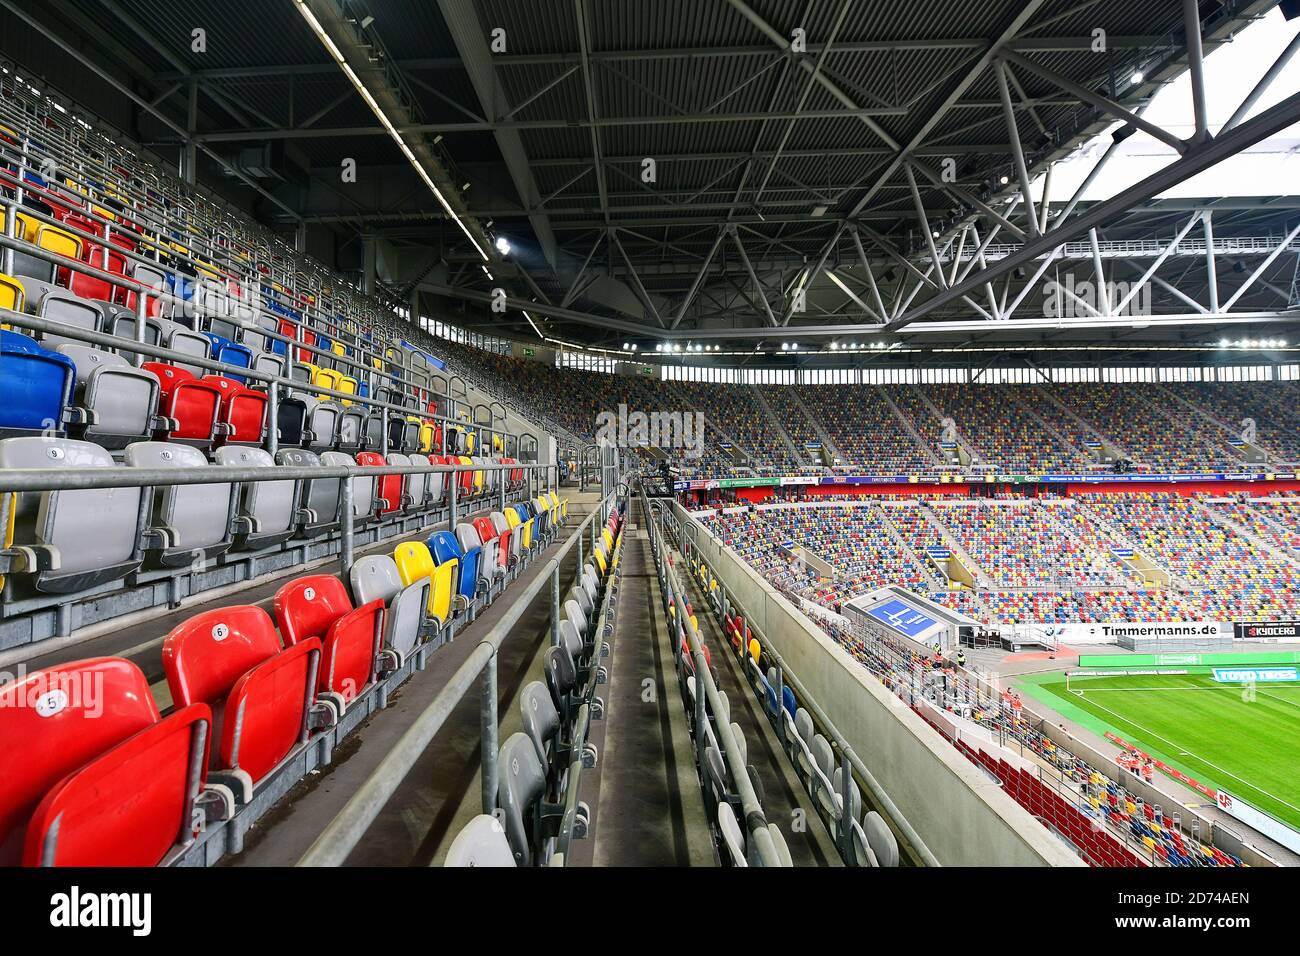 The colorful seating shells in the empty Merkur Spiel Arena in Dusseldorf,  Germany Stock Photo - Alamy